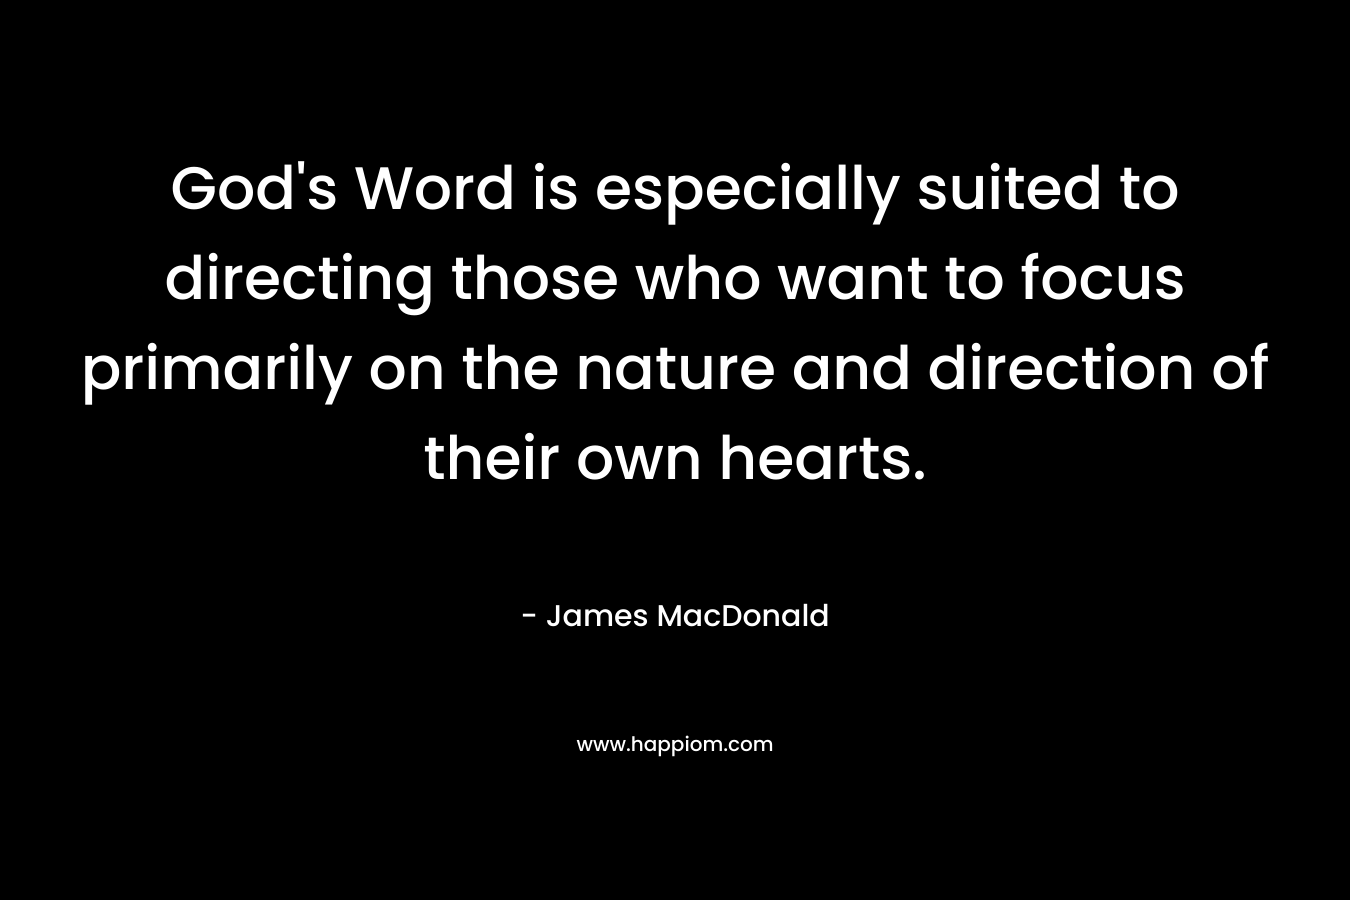 God’s Word is especially suited to directing those who want to focus primarily on the nature and direction of their own hearts. – James MacDonald